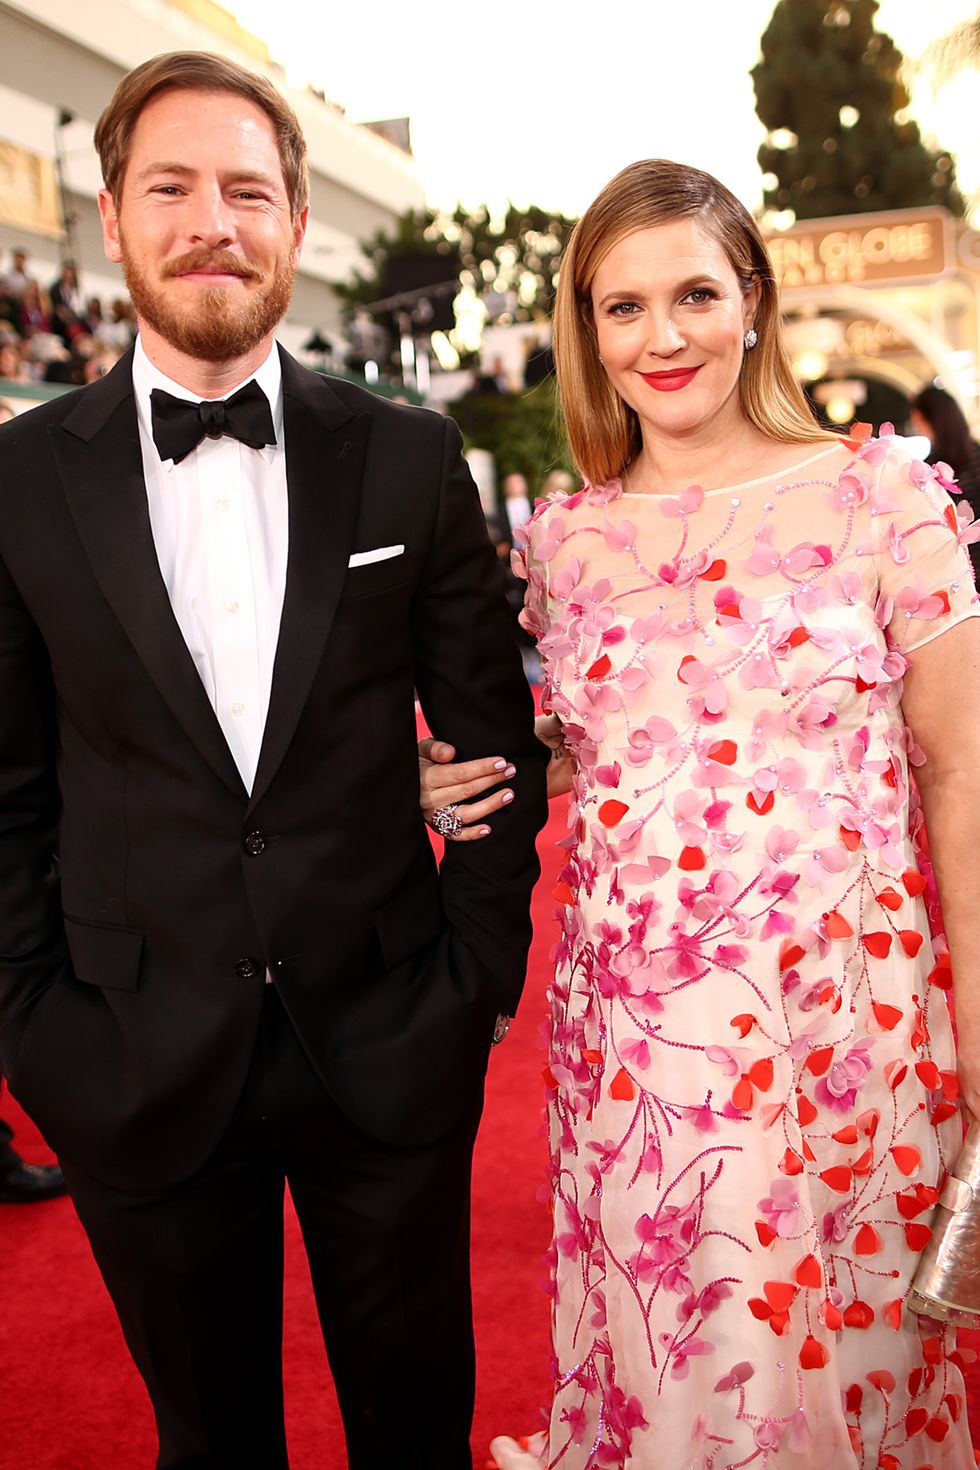 <p>Back in April, Drew Barrymore and Will Kopelman <a href="http://www.harpersbazaar.com/celebrity/party-pictures/a14968/drew-barrymore-divorce-statement/" target="_blank" data-tracking-id="recirc-text-link">announced they were divorcing</a> after three years of marriage. The couple, who shares two young daughters, <a href="http://www.harpersbazaar.com/celebrity/party-pictures/a14968/drew-barrymore-divorce-statement/" target="_blank" data-tracking-id="recirc-text-link">released a statement</a> saying, "Divorce might make one feel like a failure, but eventually you start to find grace in the idea that life goes on. Our children are our universe, and we look forward to living the rest of our lives with them as the first priority." </p>